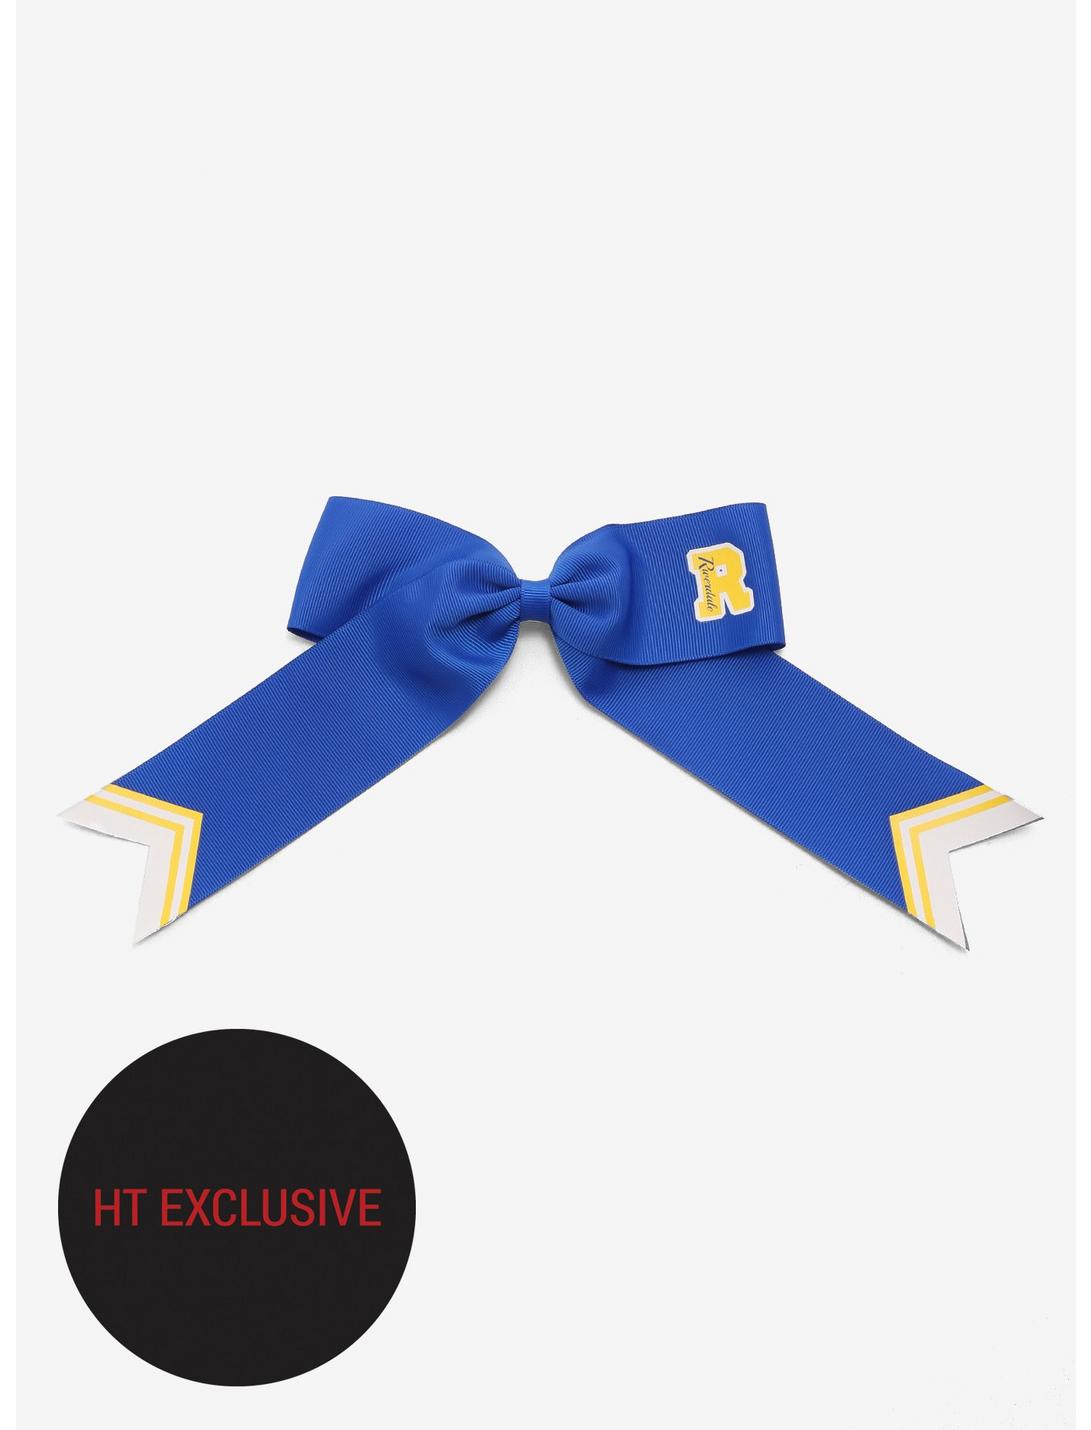 Riverdale Varsity Cheer Bow Hot Topic Exclusive, , hi-res